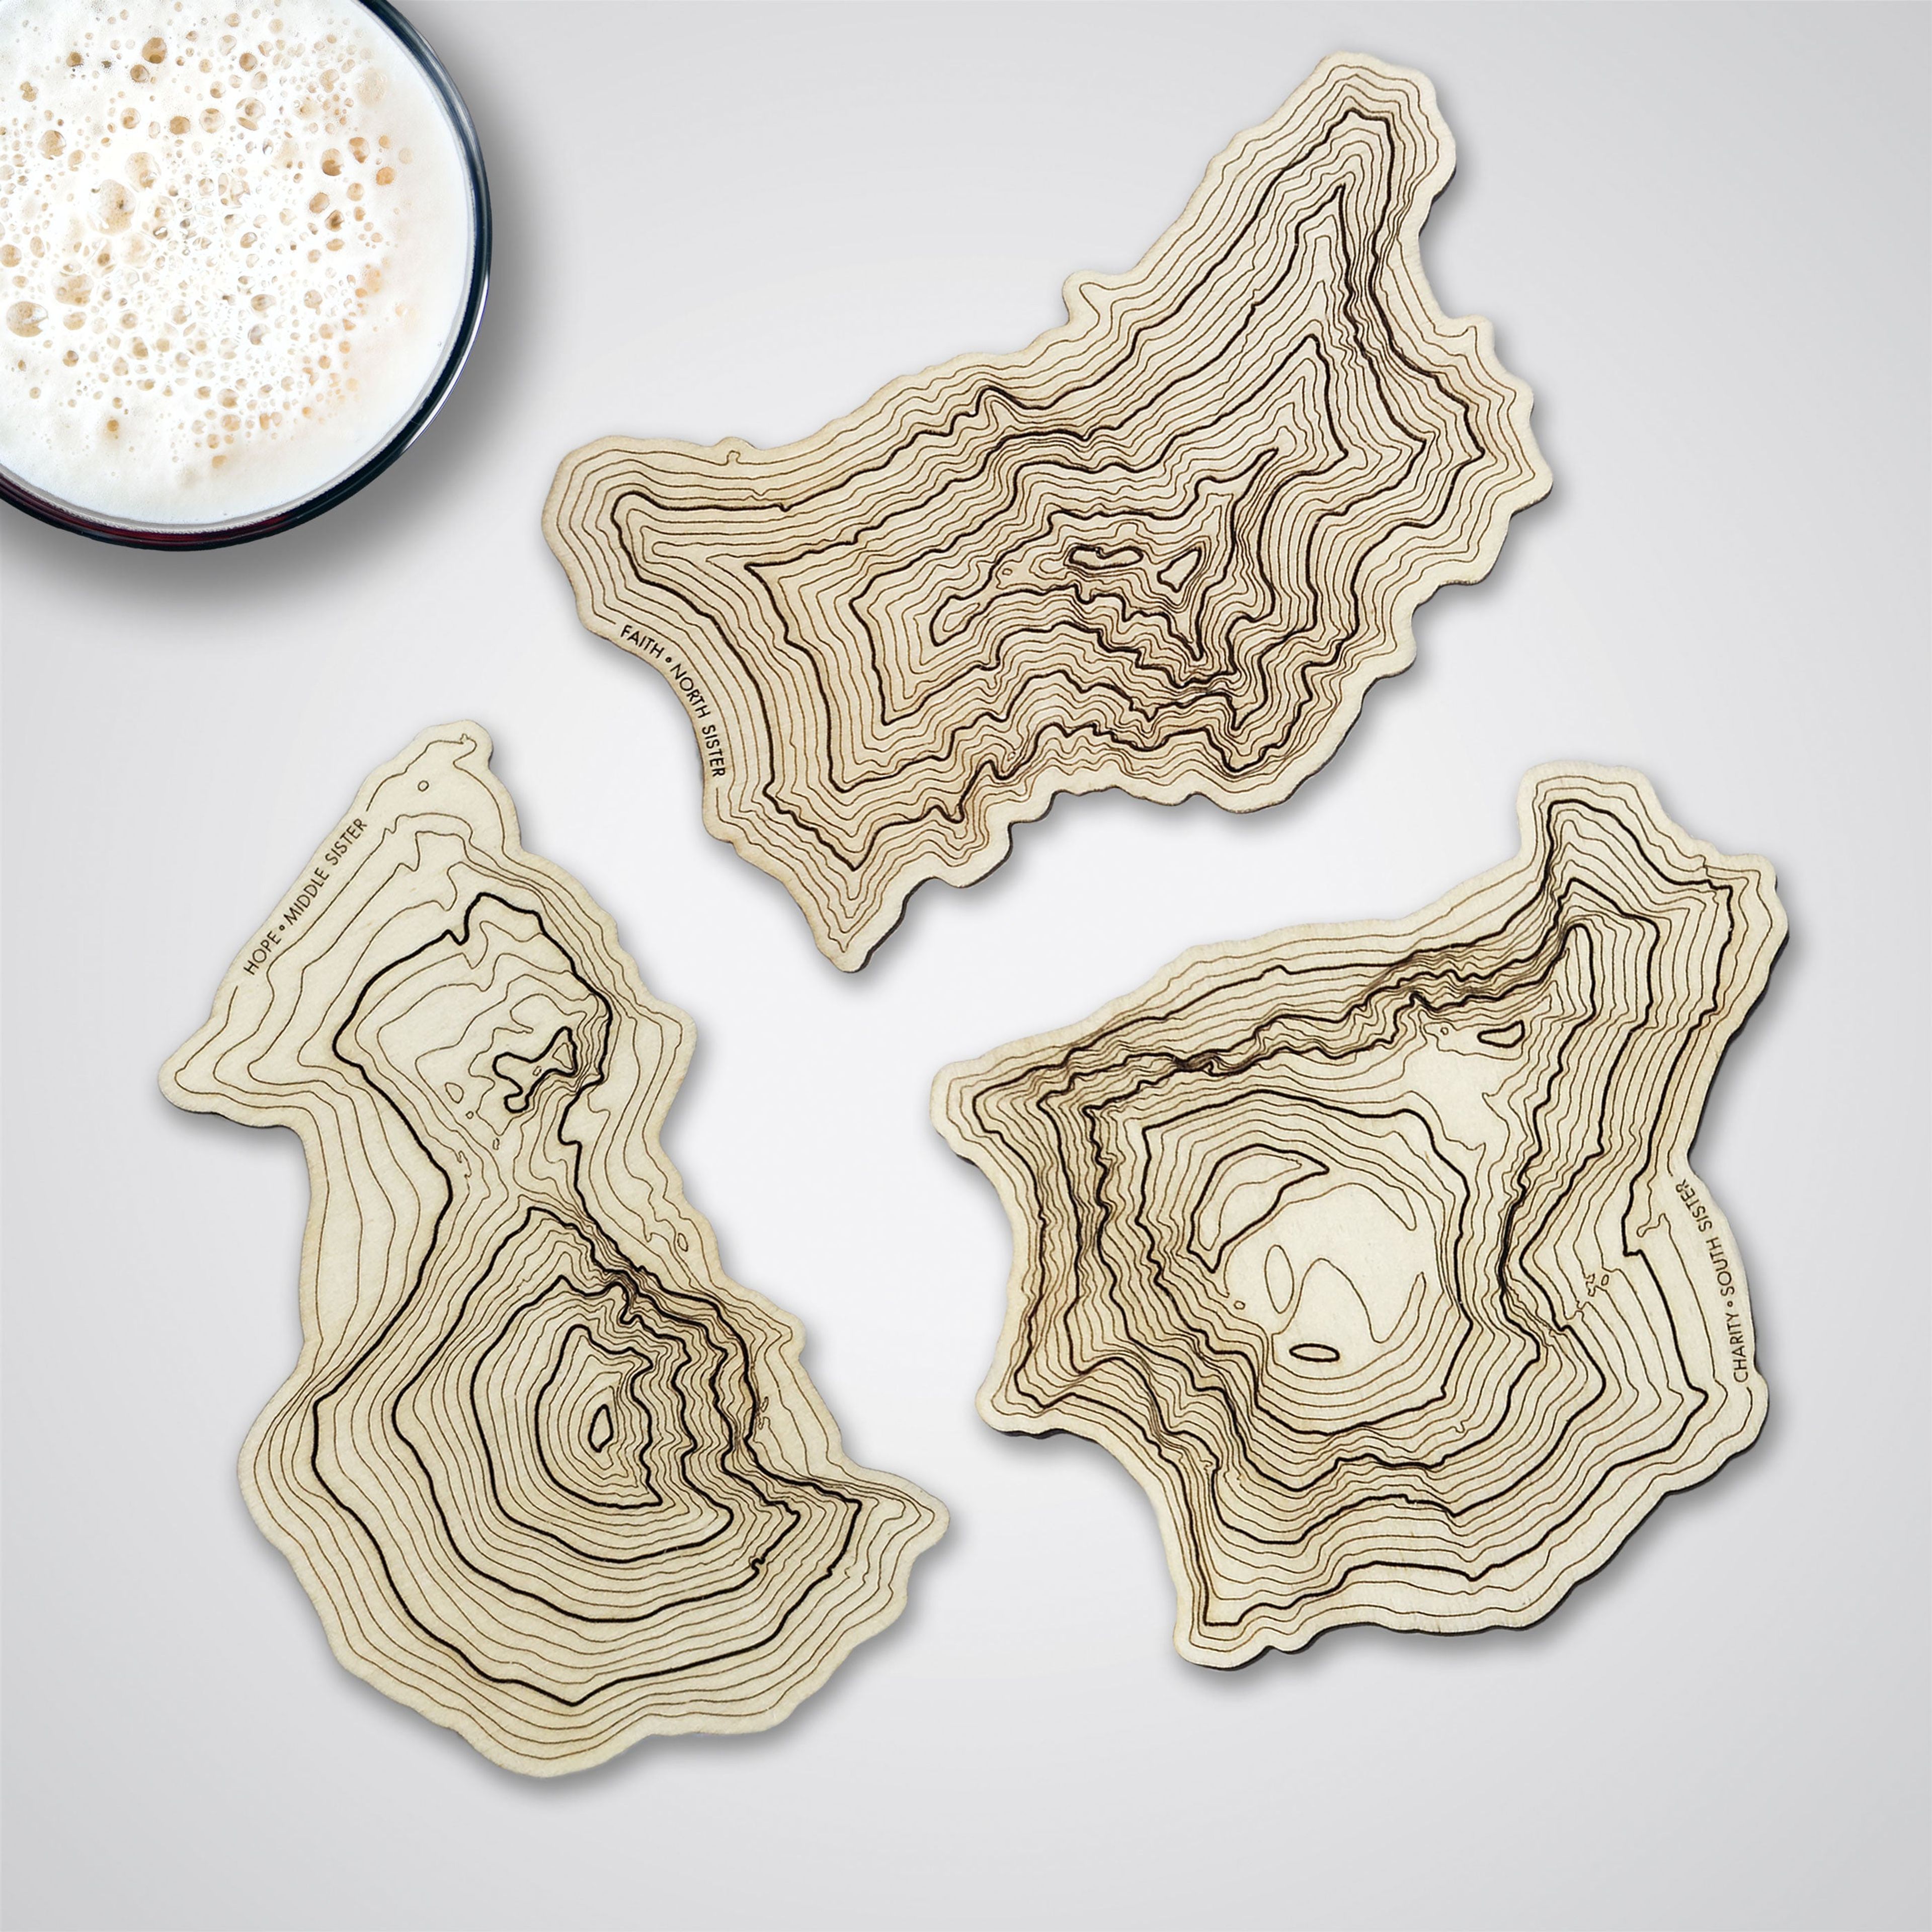 Three Sisters Topography Coasters - Set of 3